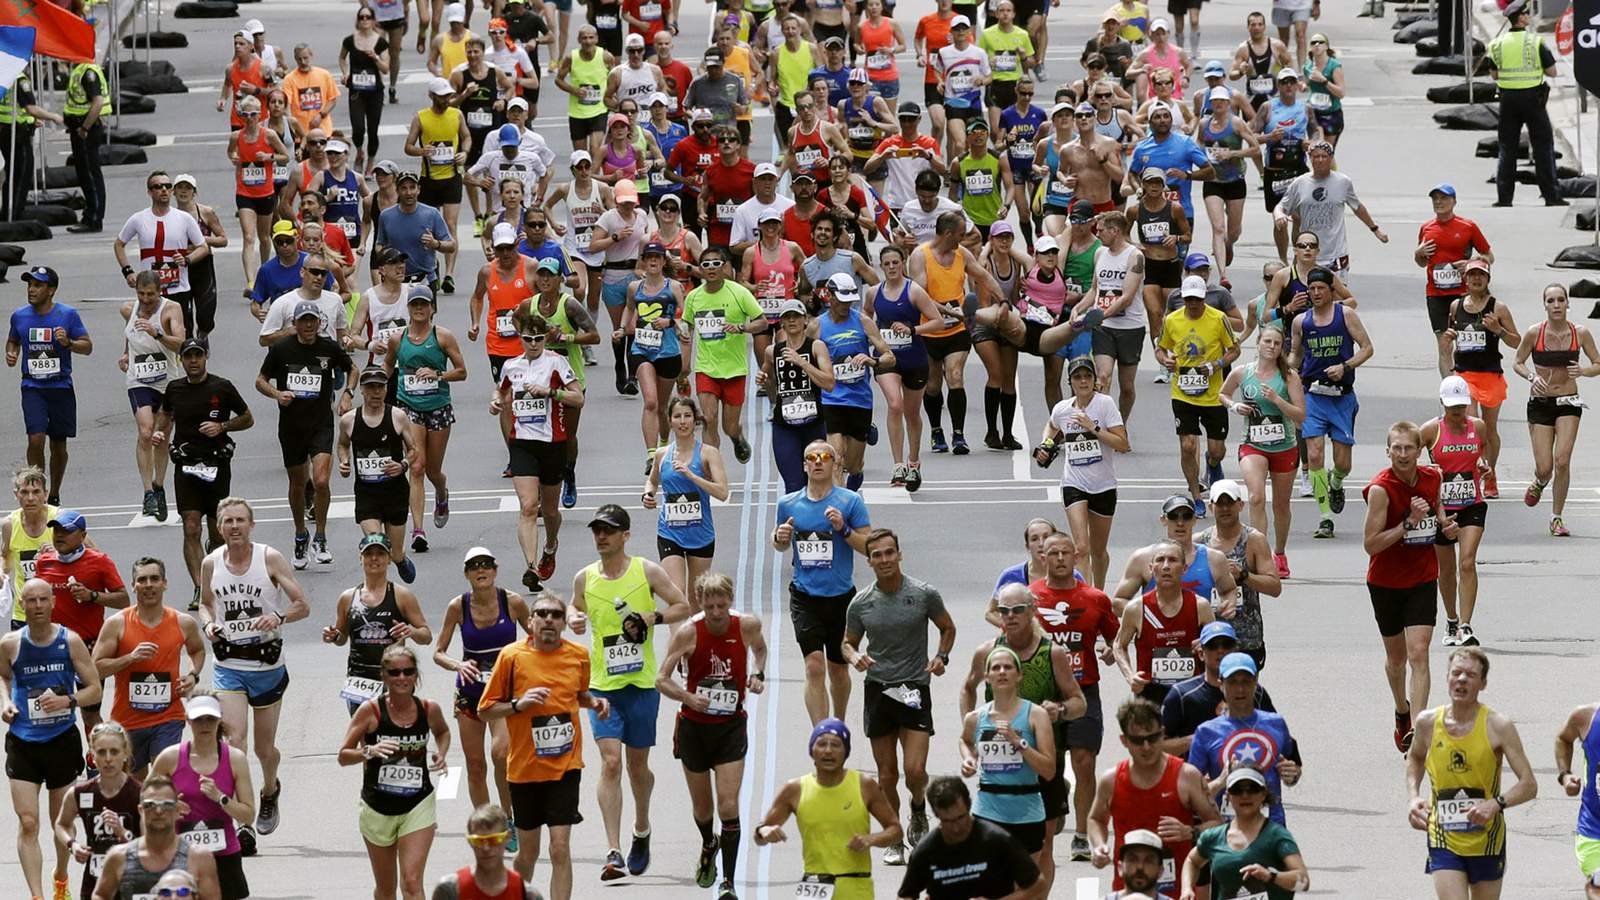 Boston Marathon plan to hand out 70,000 medals roils runners